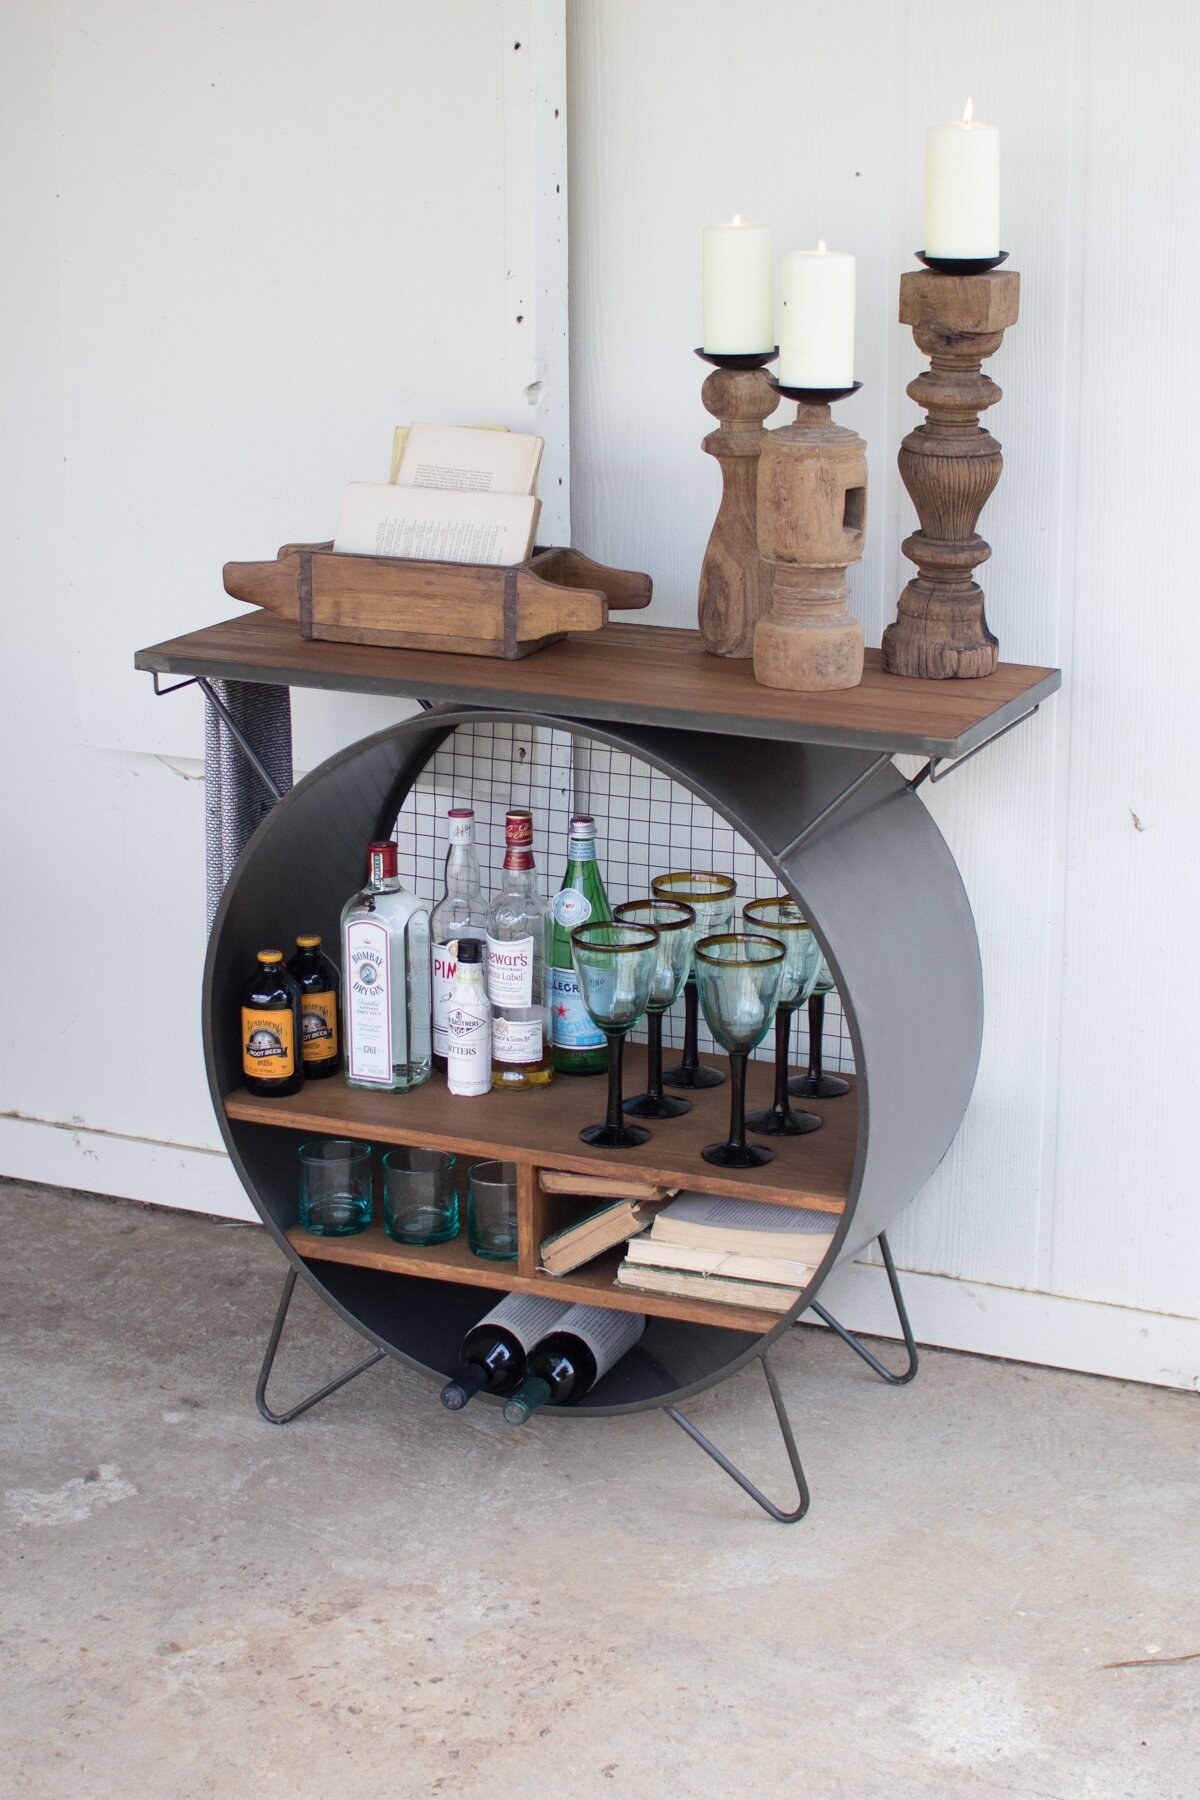 A metal circle with shelves stocked with alcohol, with a piece of wood strapped to the top for an additional shelf.